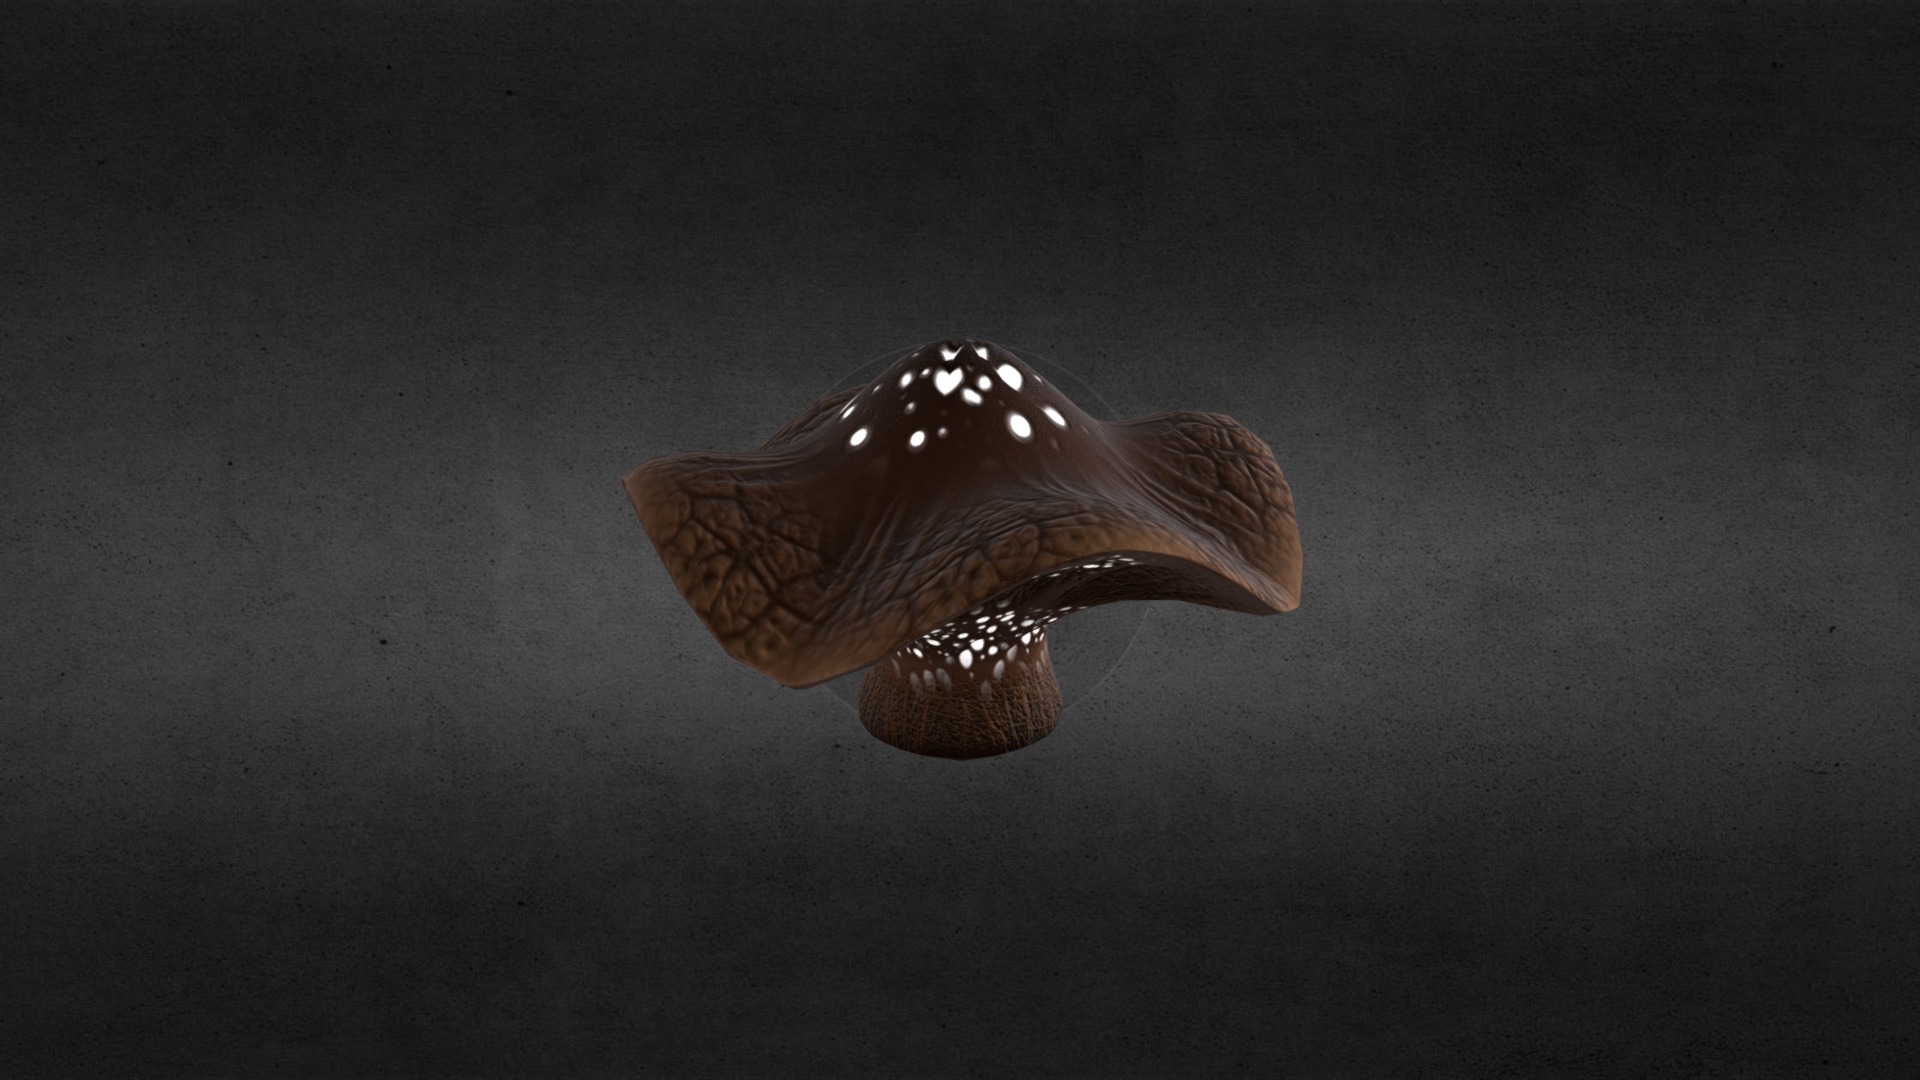 3D model Mushroom 3 - This is a 3D model of the Mushroom 3. The 3D model is about a feather on a surface.